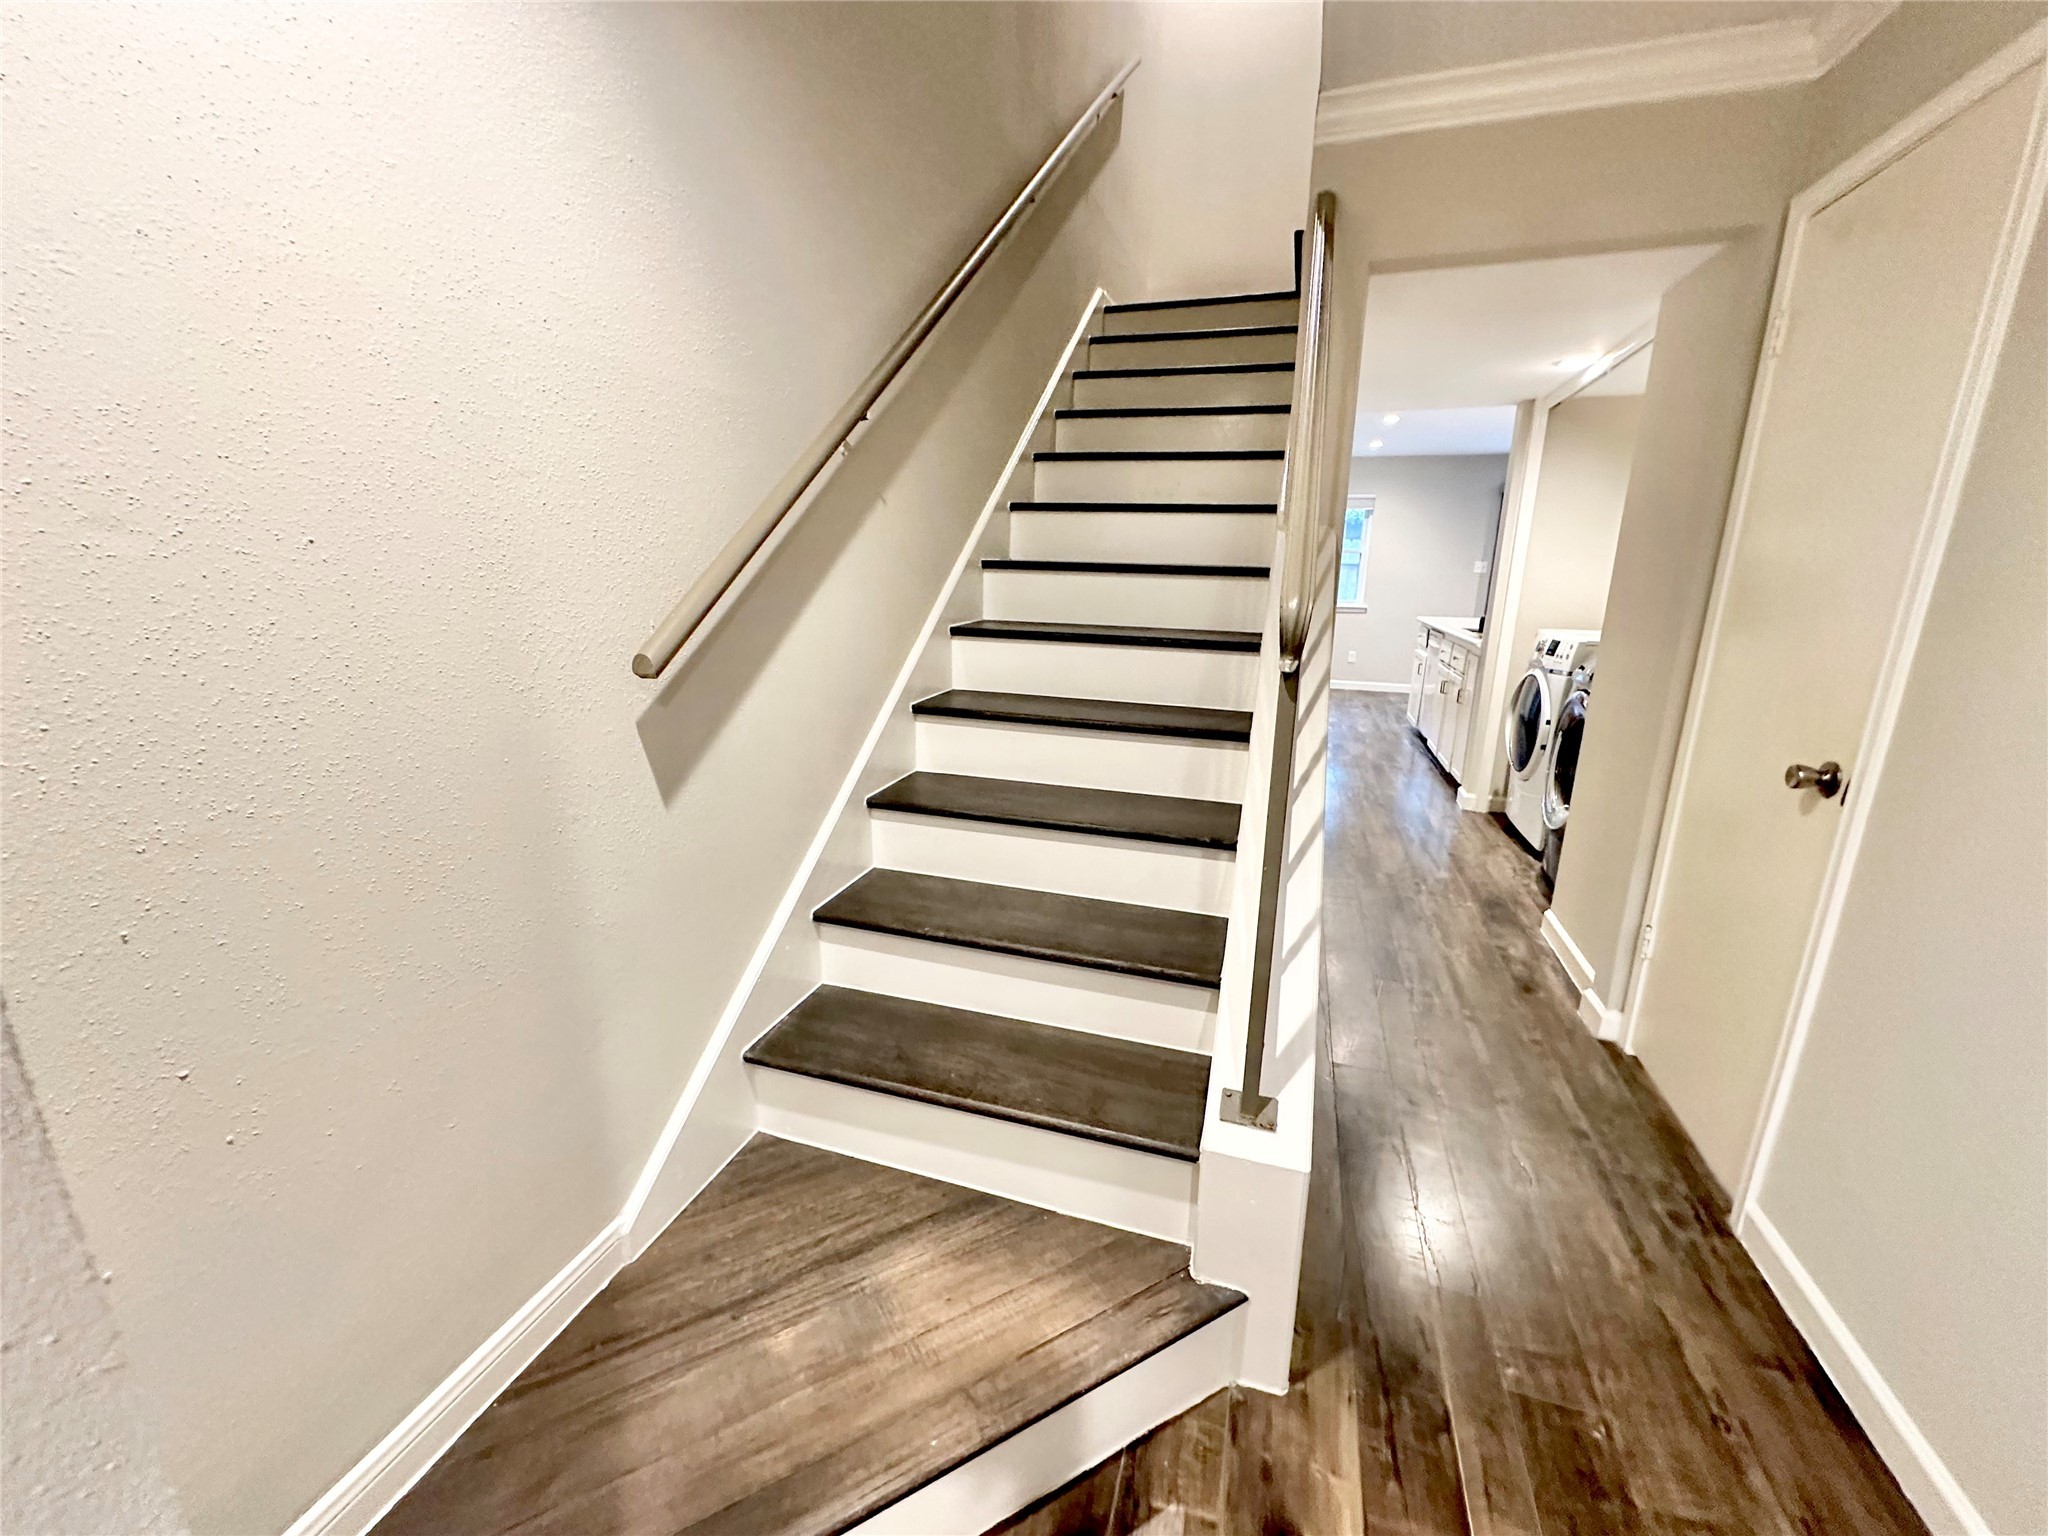 Recently updated stairs with wood stair case.